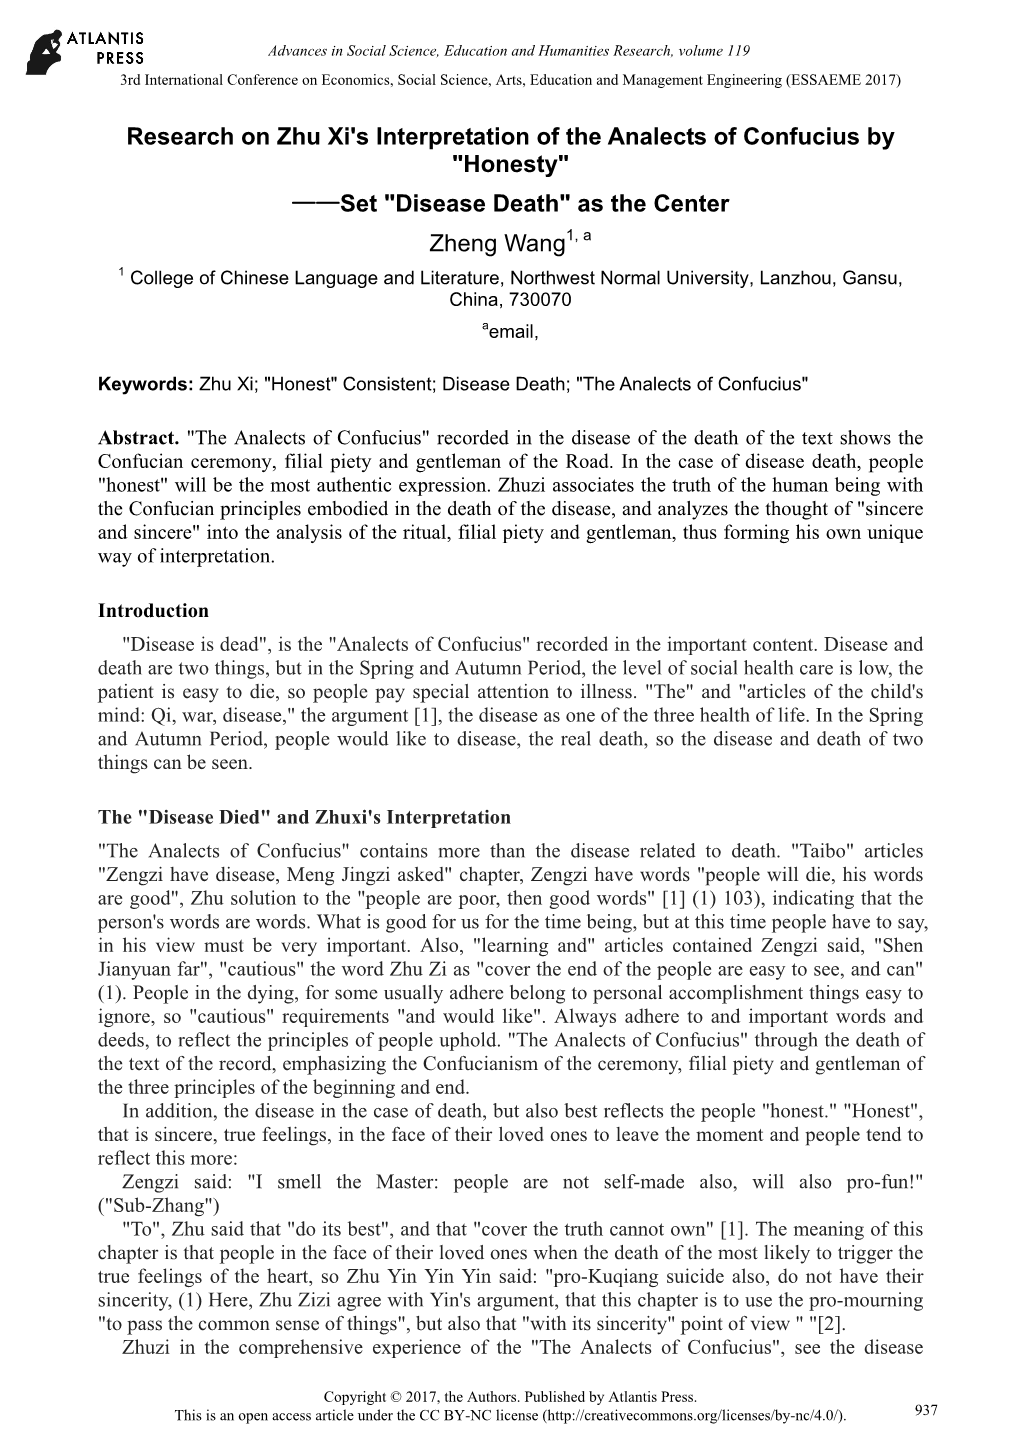 Research on Zhu Xi's Interpretation of the Analects of Confucius By